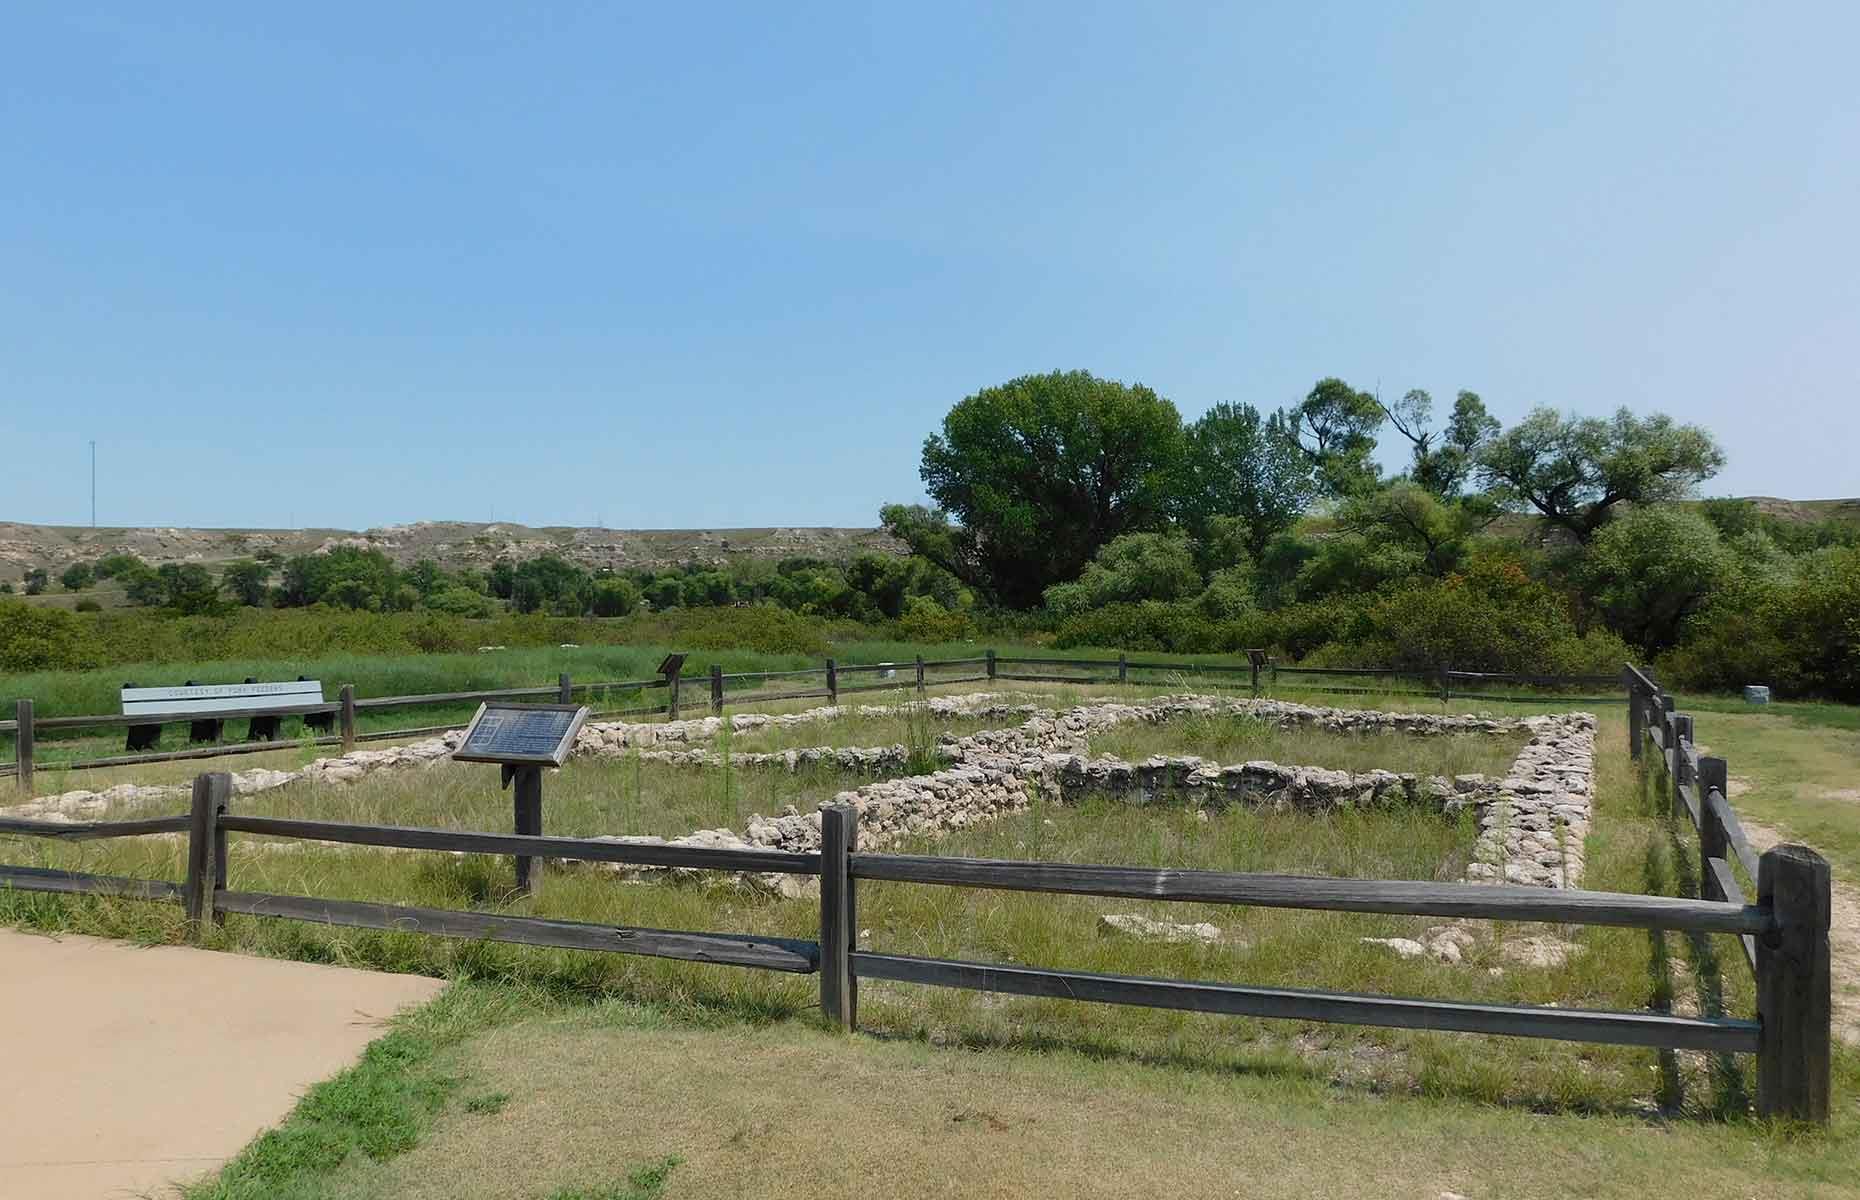 <p>You’ll find the USA’s most northeastern pueblo (settlement) ruins in Scott County, Kansas. Dated to <a href="http://www.keystonegallery.com/area/history/el_cuartelejo.html">AD 1650</a>, many archaeologists reckon this was originally a seven-room pueblo in El Cuartelejo, a Plains Apache village. Then, in 1664, Taos Indians sought refuge in the village after escaping Spanish rule, cohabiting with the Apaches who already lived there. See their village for yourself along the Western Vistas Historic Byway.</p>